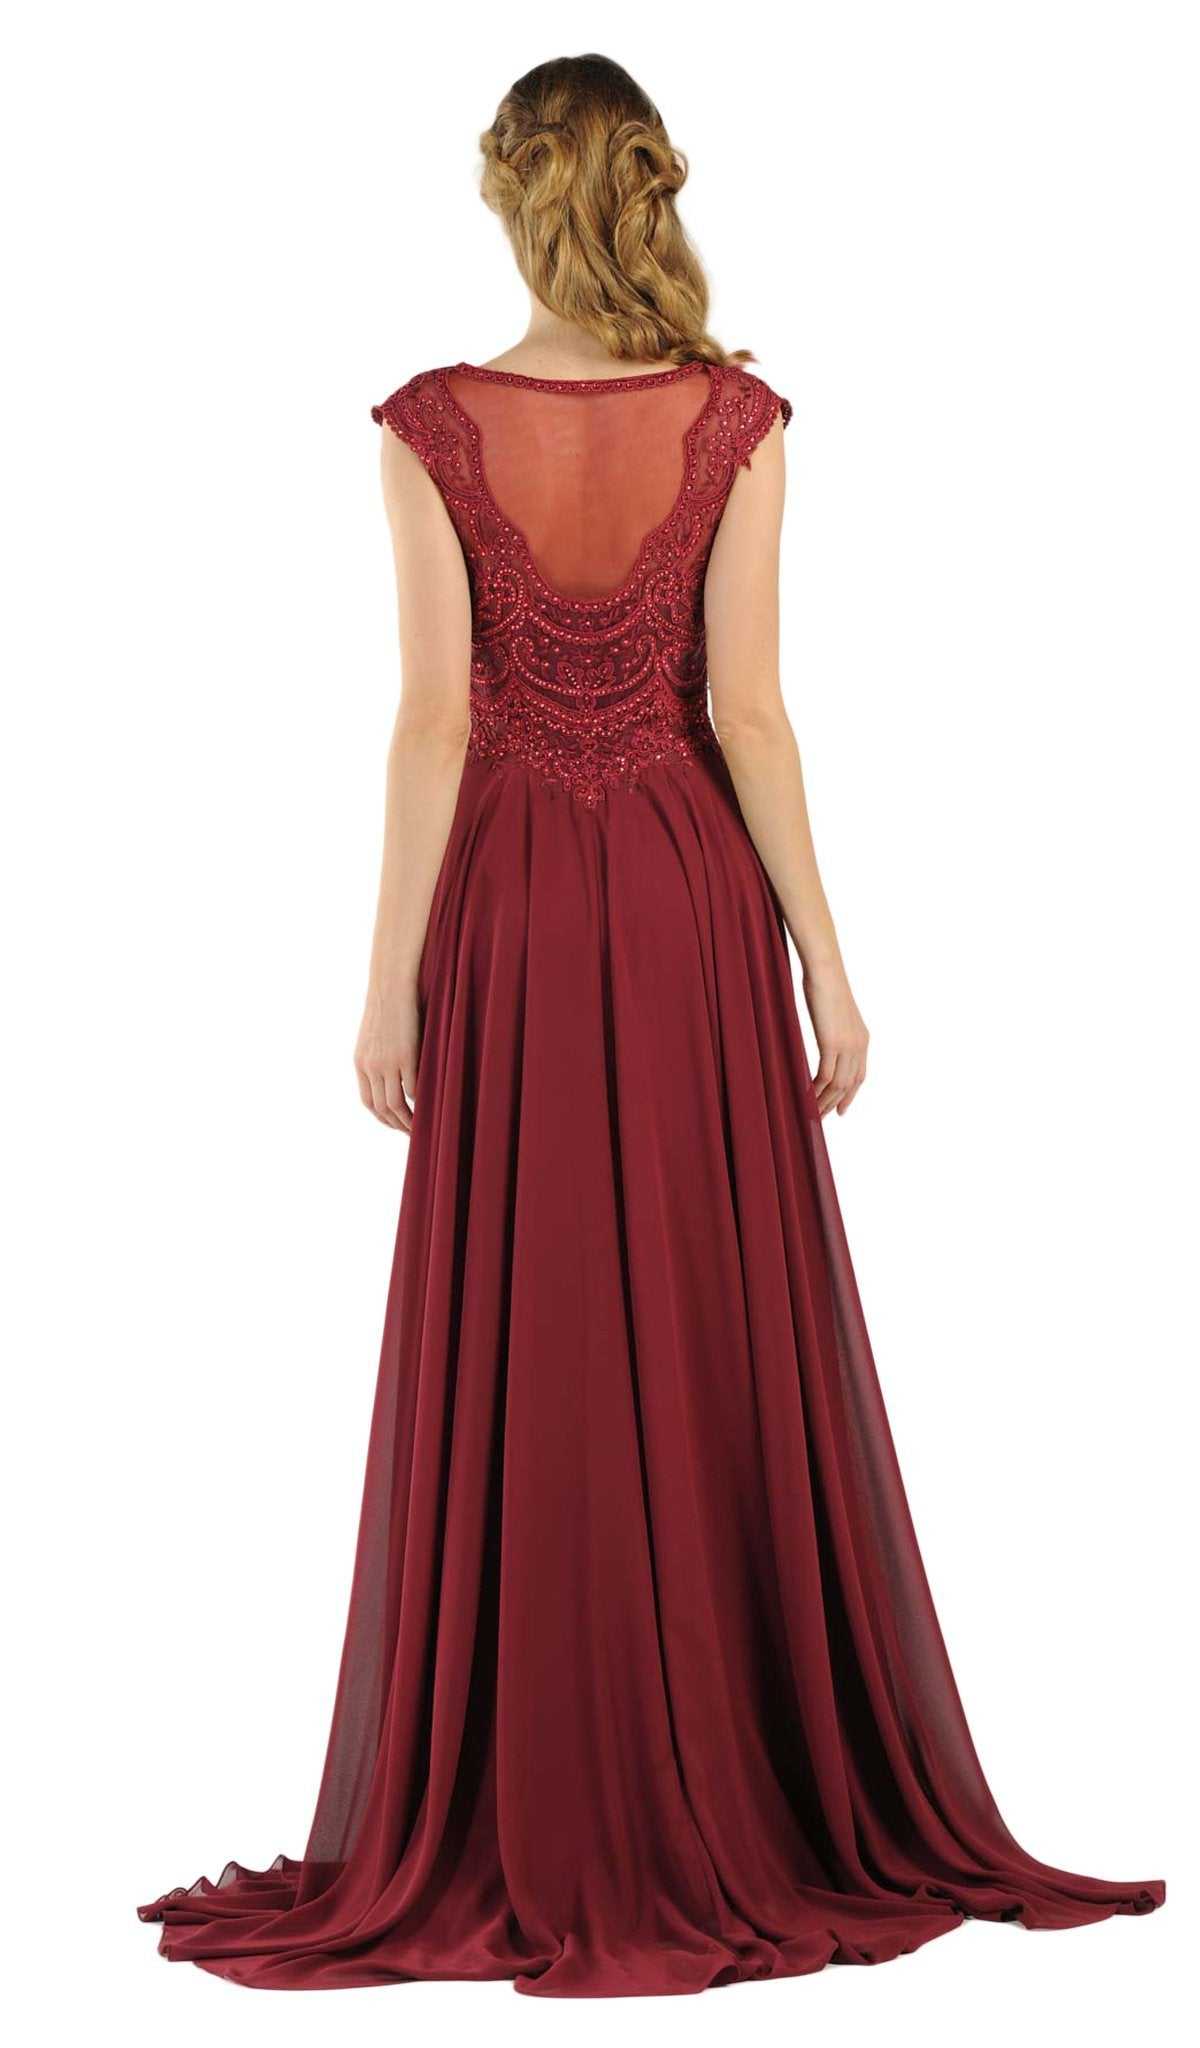 Poly USA, Poly USA - 8254 Cap Sleeve Embroidered Illusion Chiffon Gown